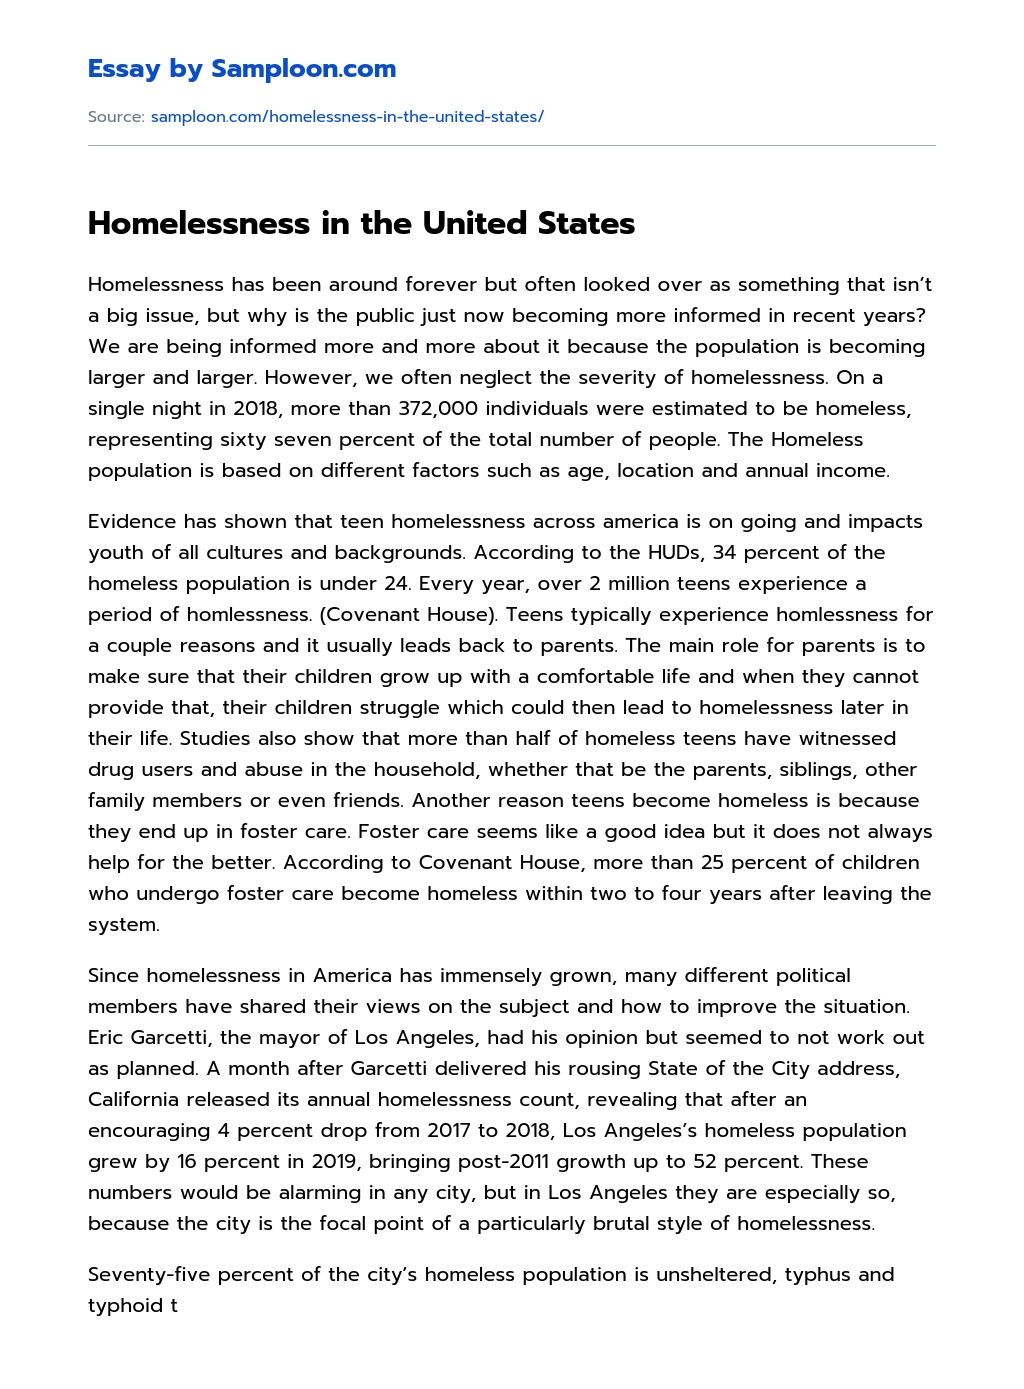 Homelessness in the United States essay